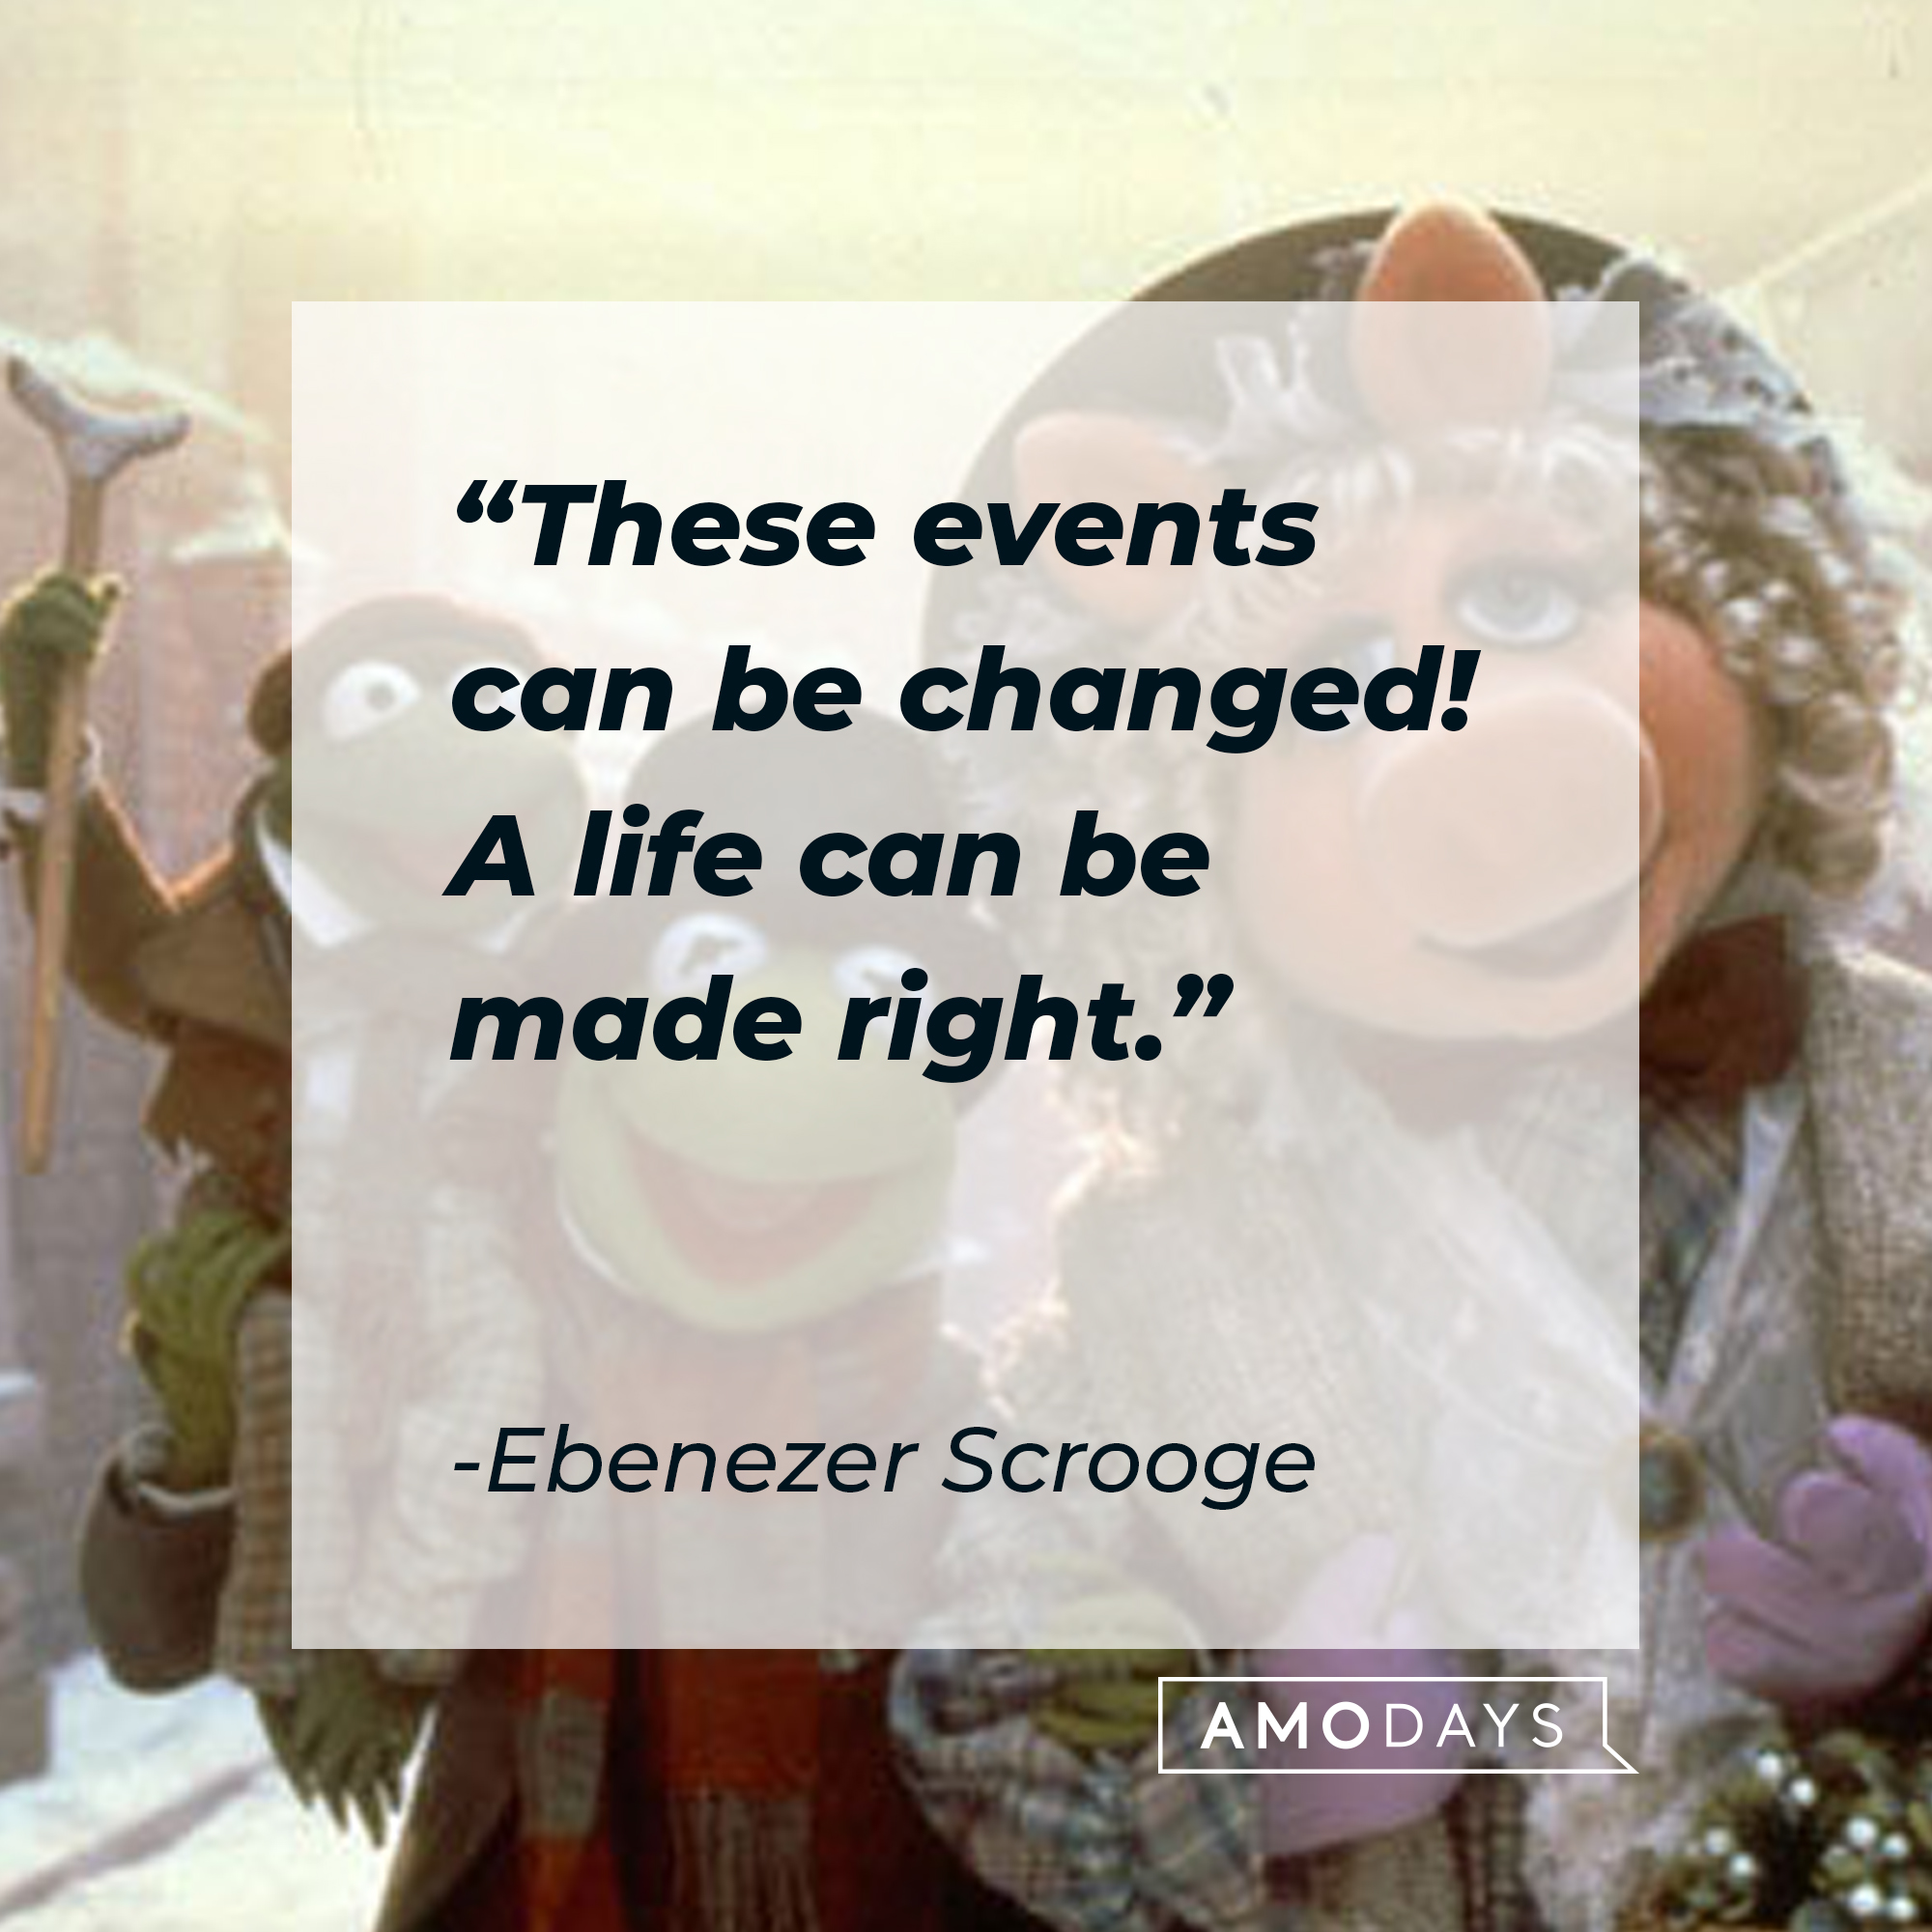 Ebenezer Scrooge's quote: “These events can be changed! A life can be made right.” | Source: facebook.com/The Muppets Christmas Carol